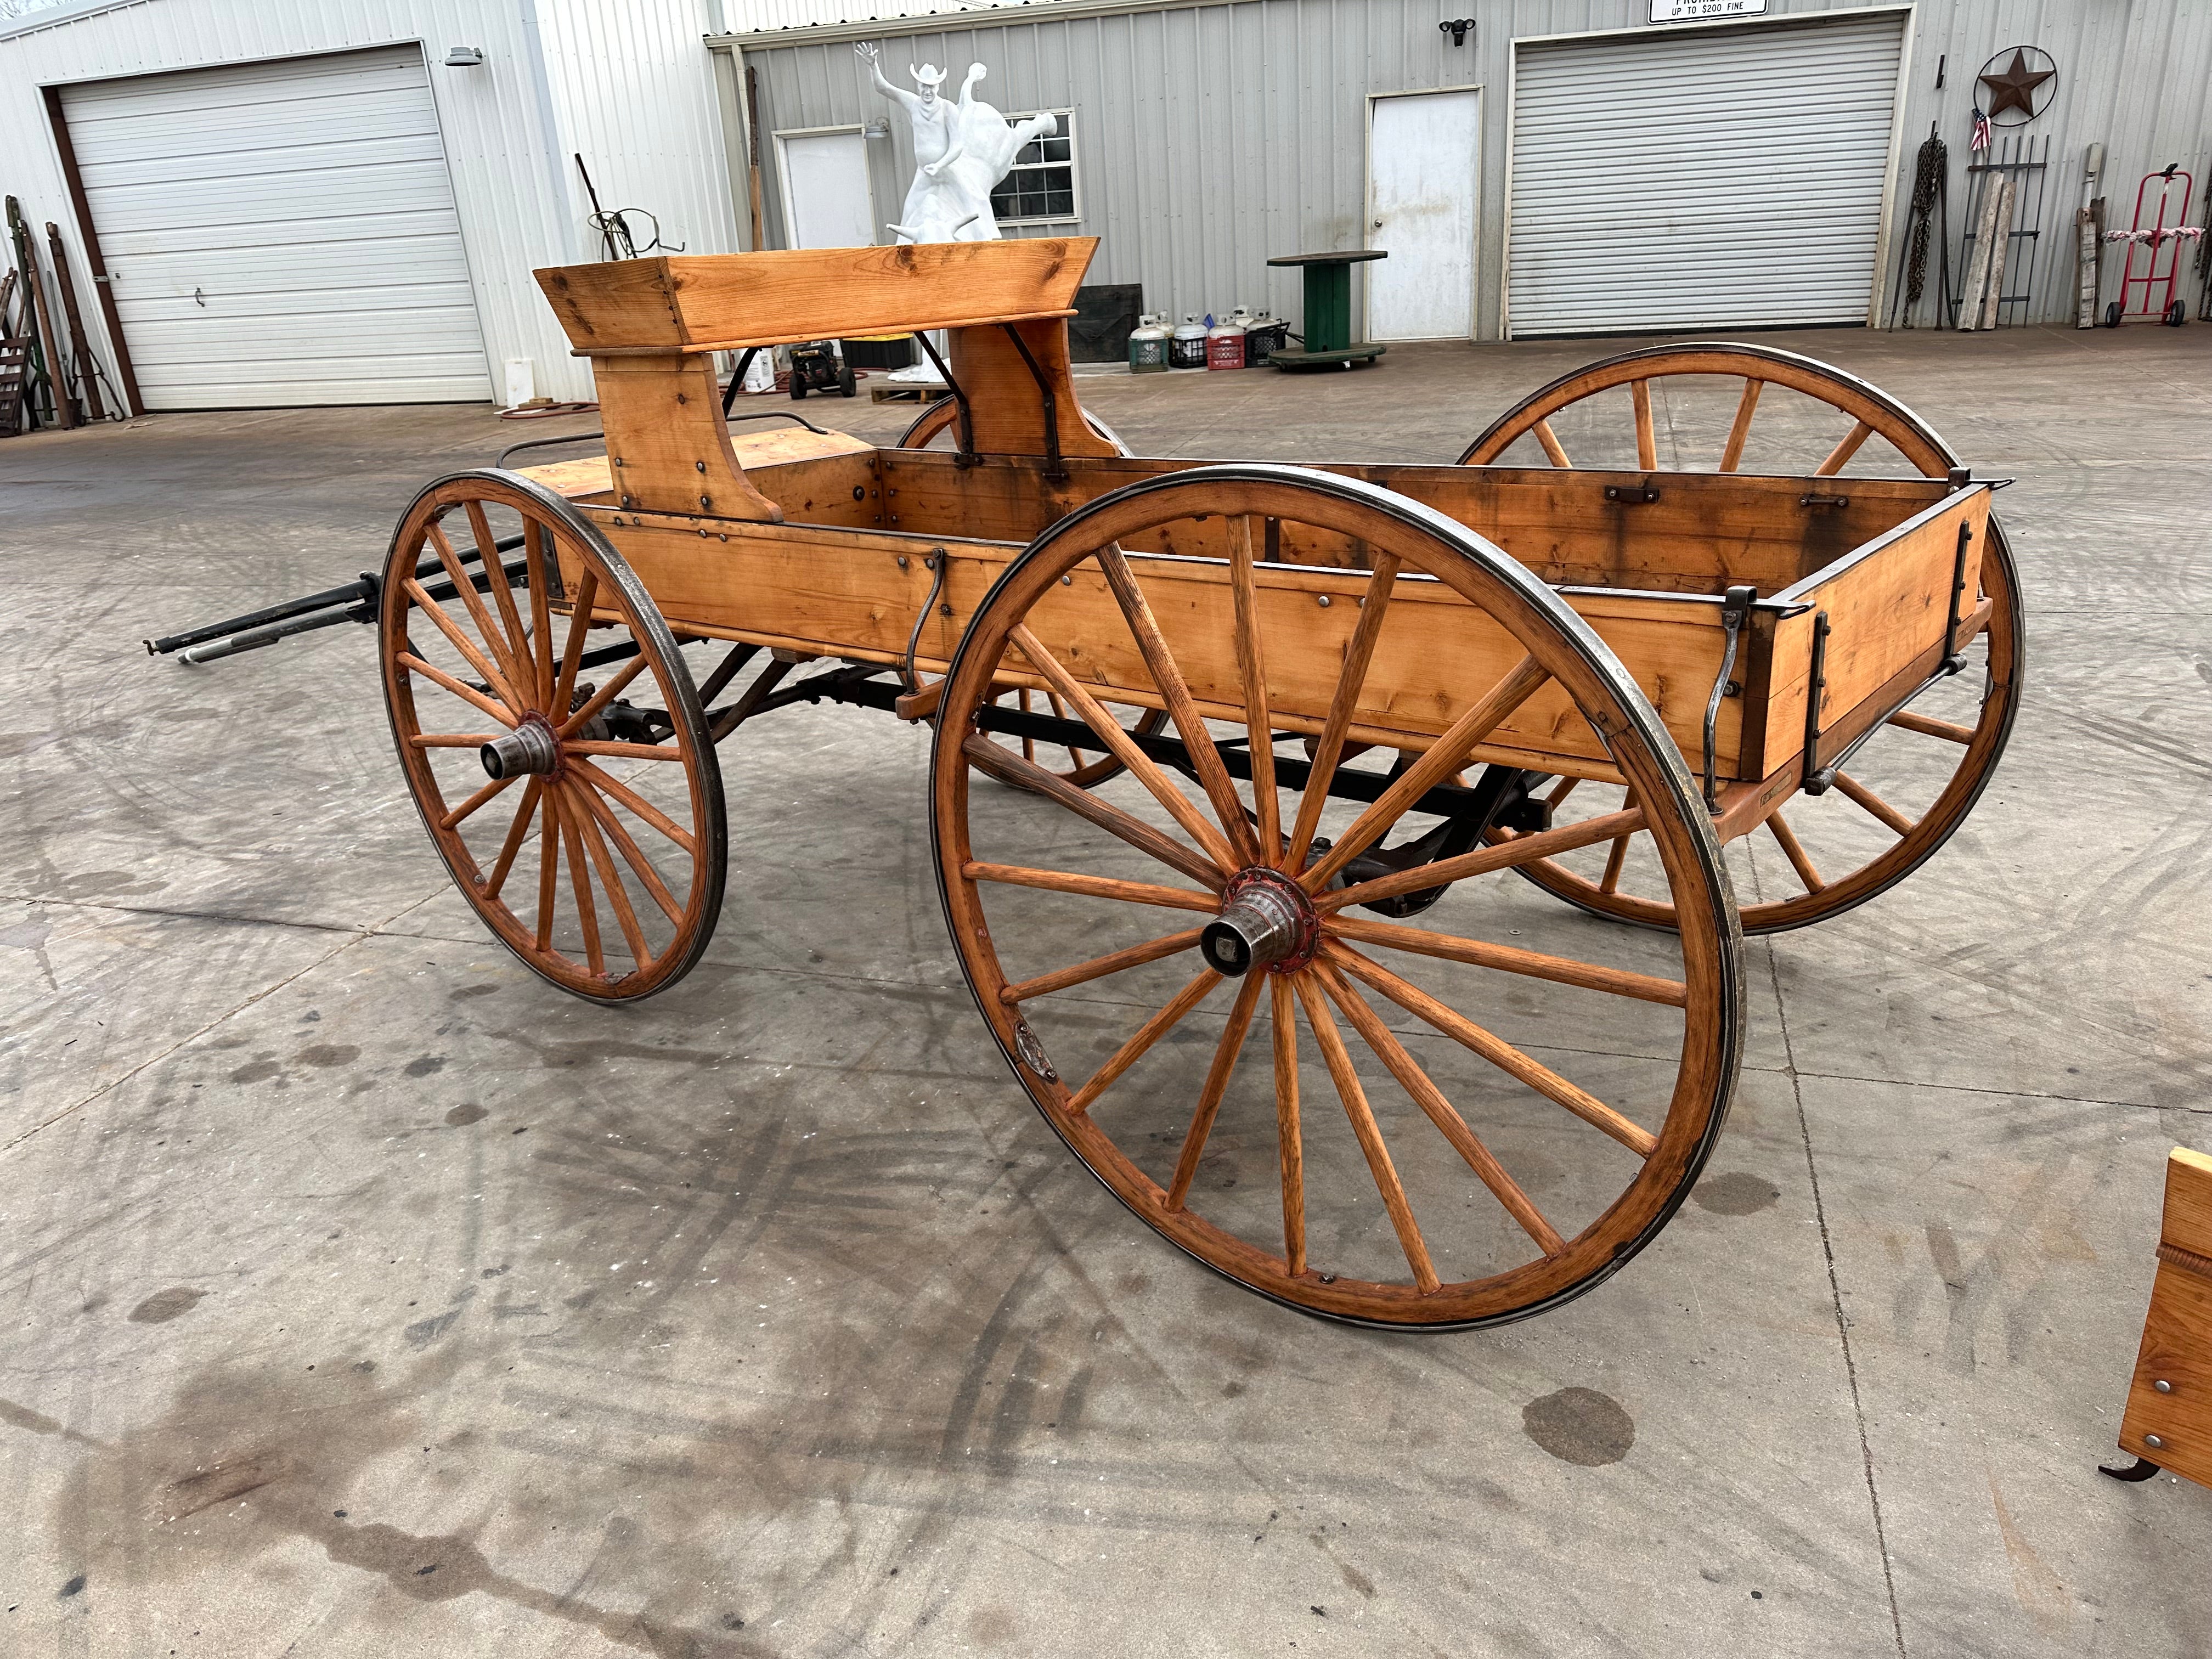 SOLD*Nice Spring Wagon with 3 Seats